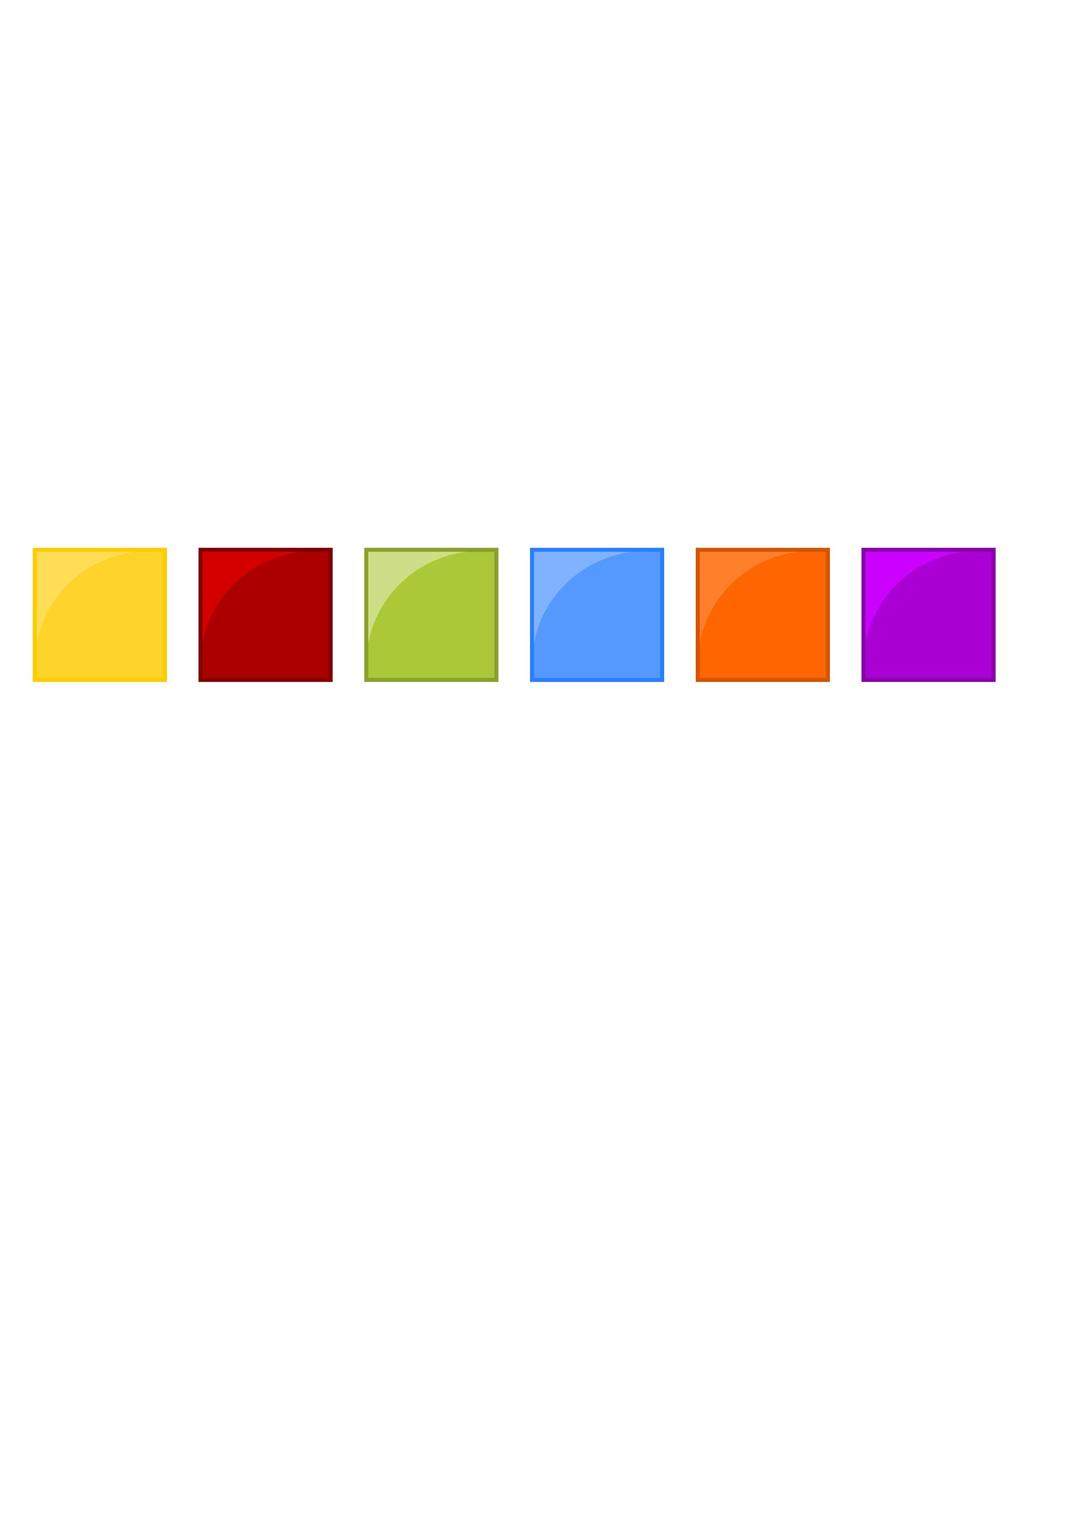 Colorful Square Icon Backgrounds png transparent